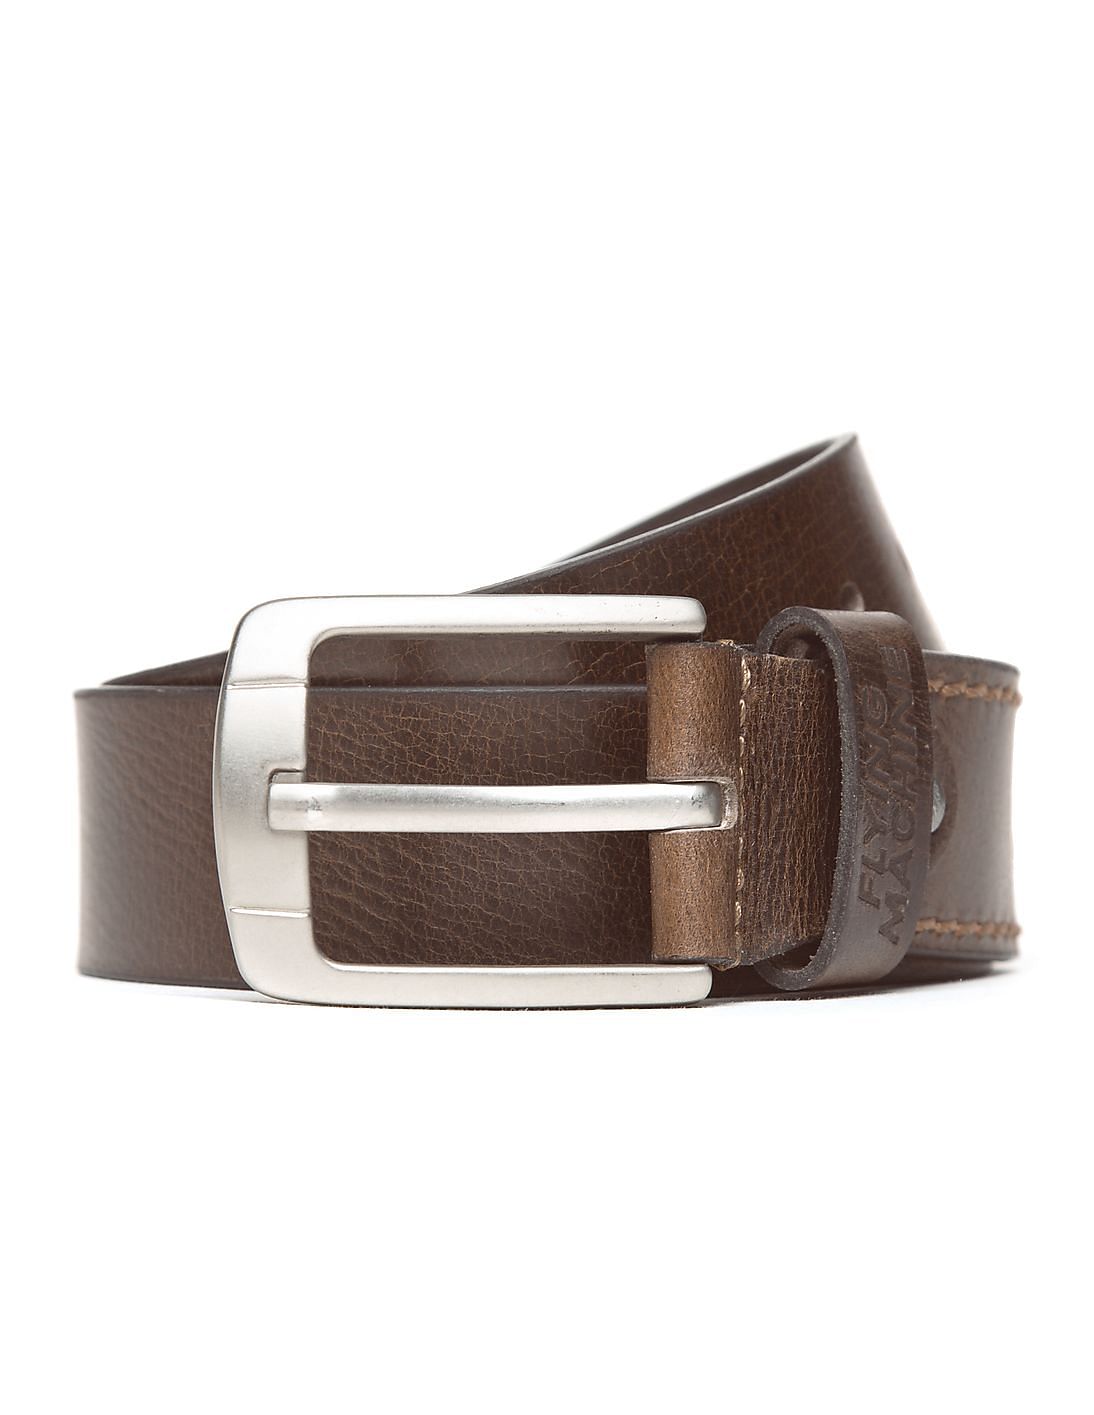 Buy Flying Machine Distressed Leather Belt - NNNOW.com